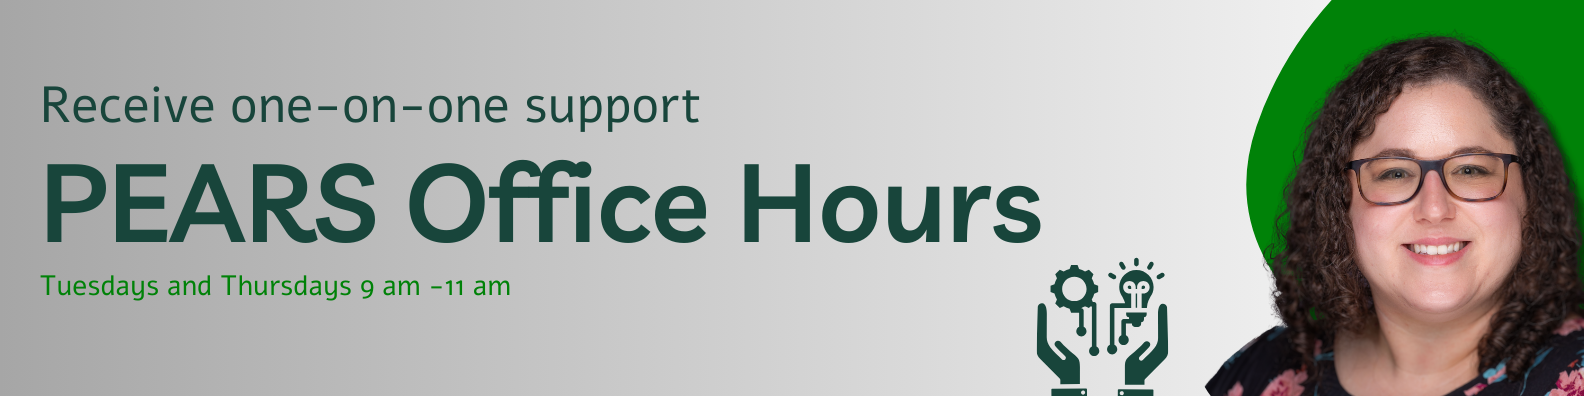 PEARS Office Hours Banner no link.png